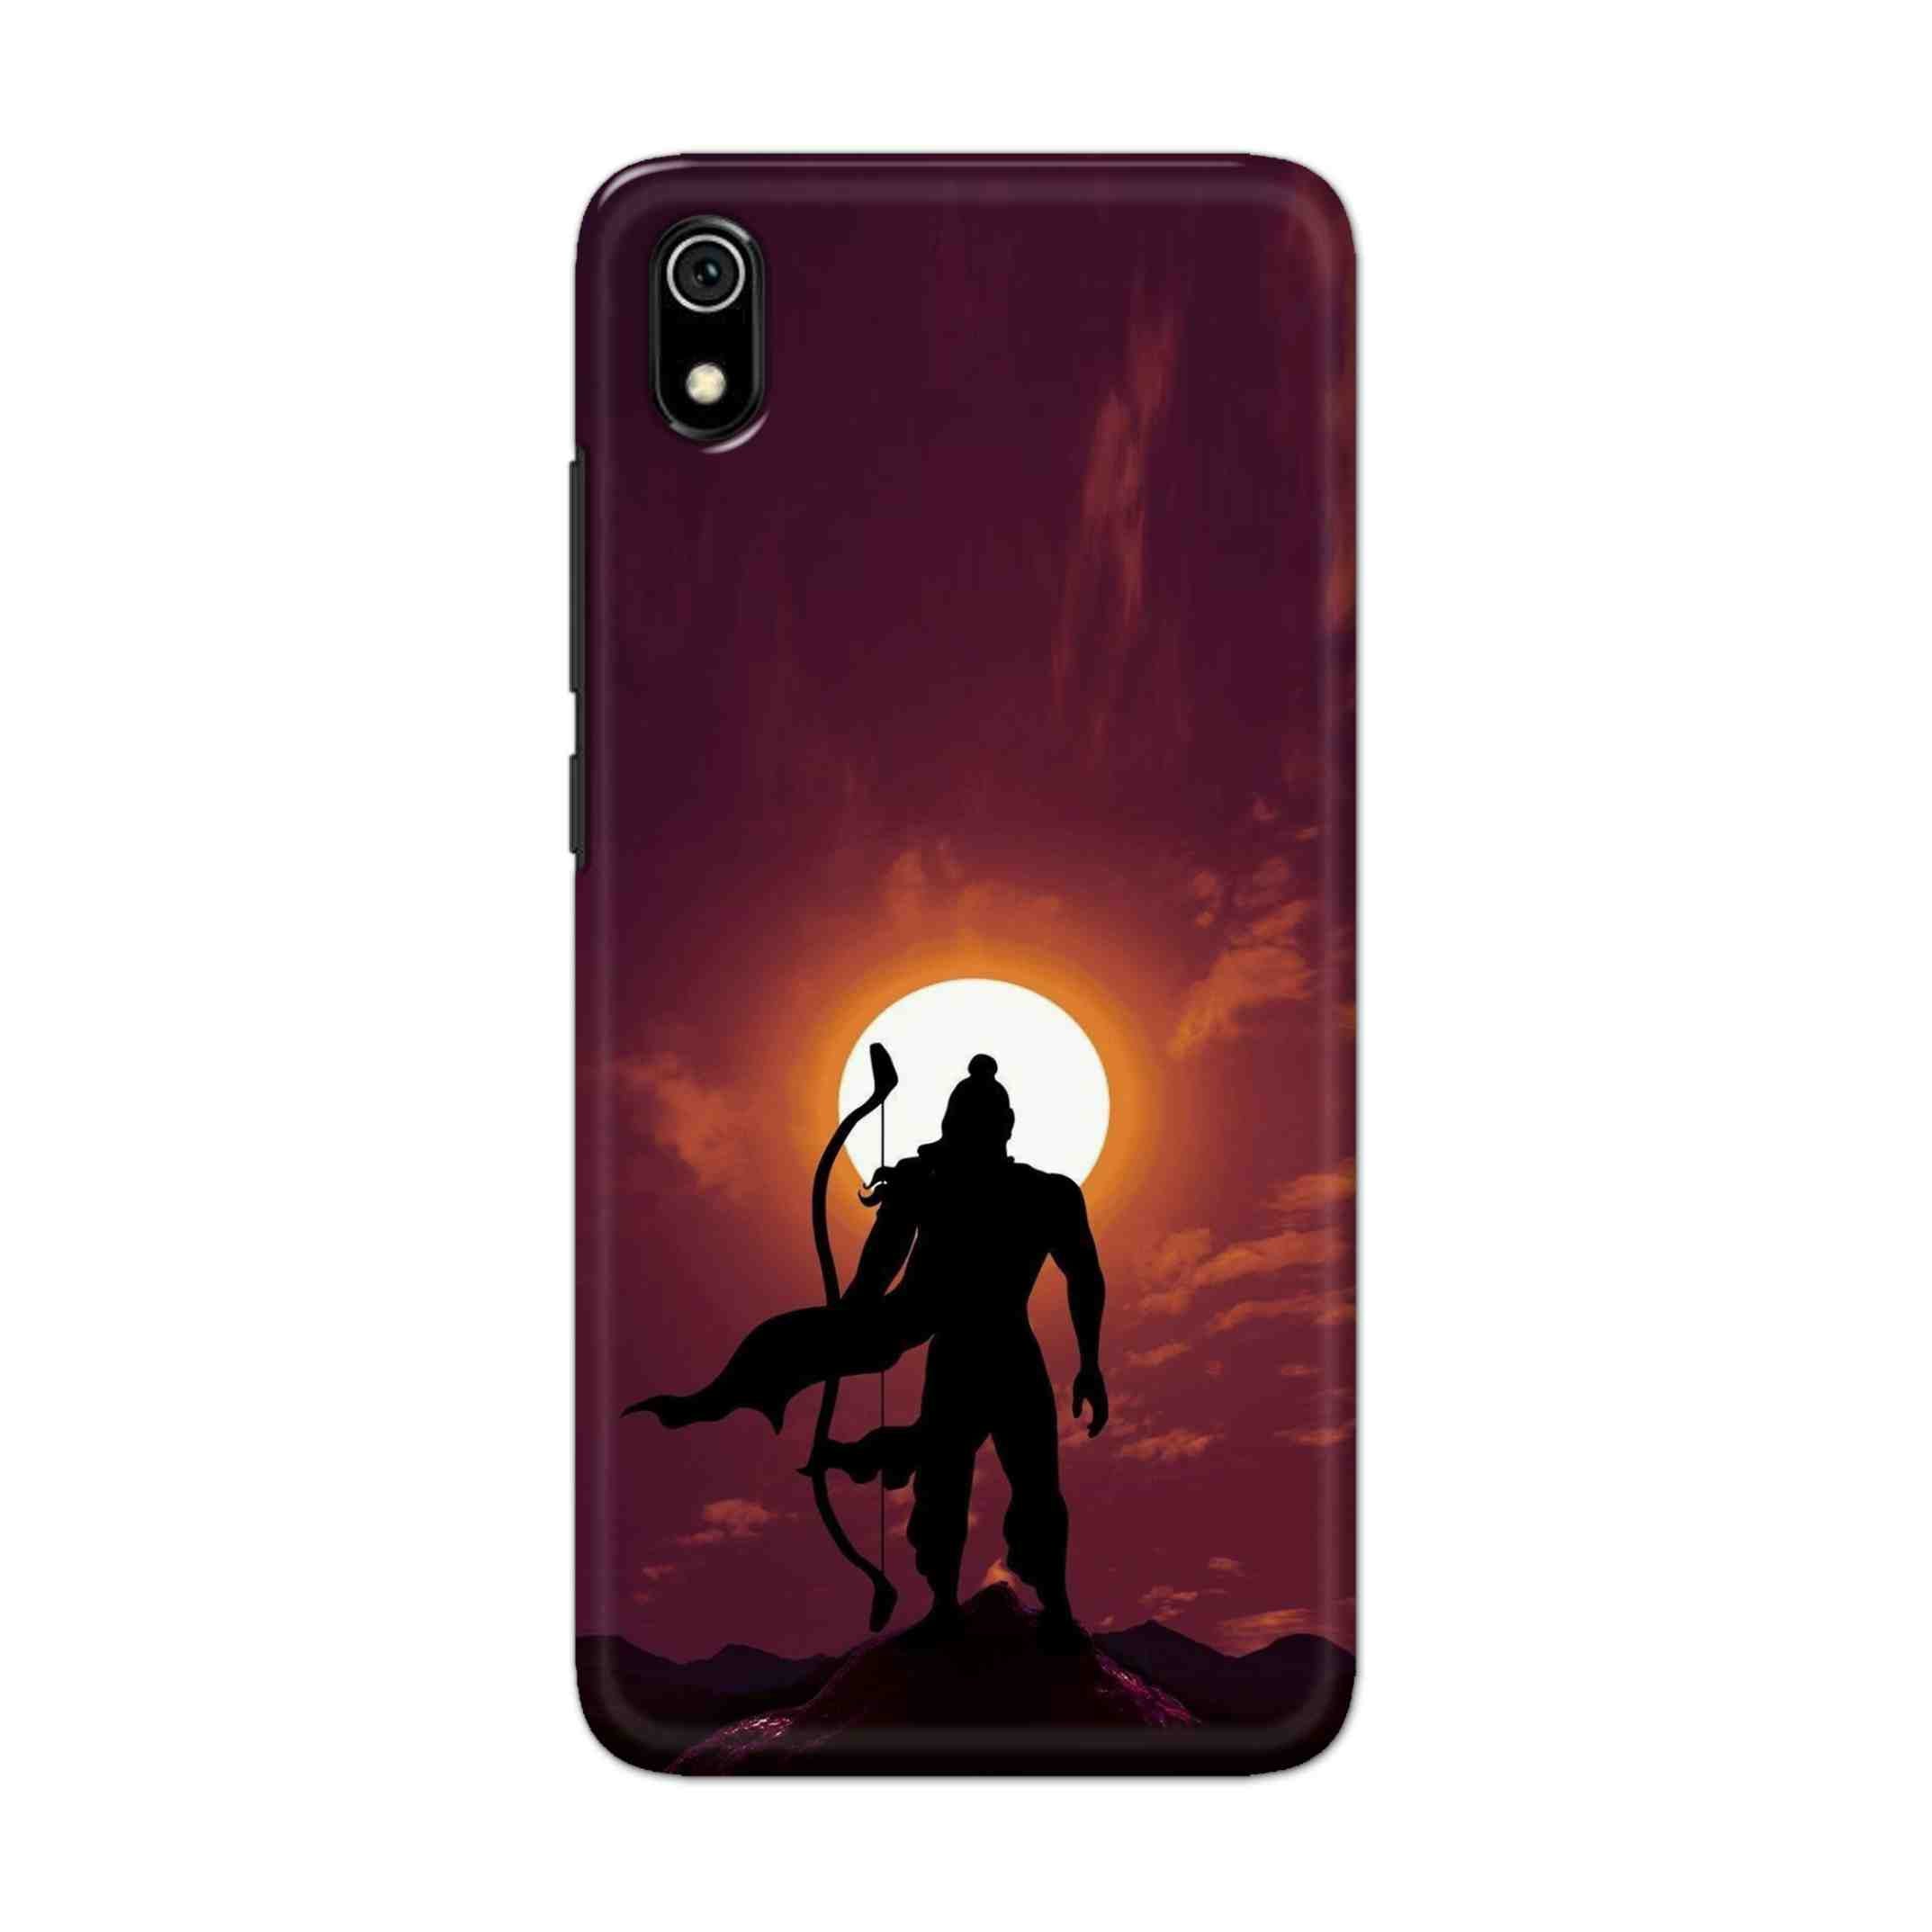 Buy Ram Hard Back Mobile Phone Case Cover For Xiaomi Redmi 7A Online